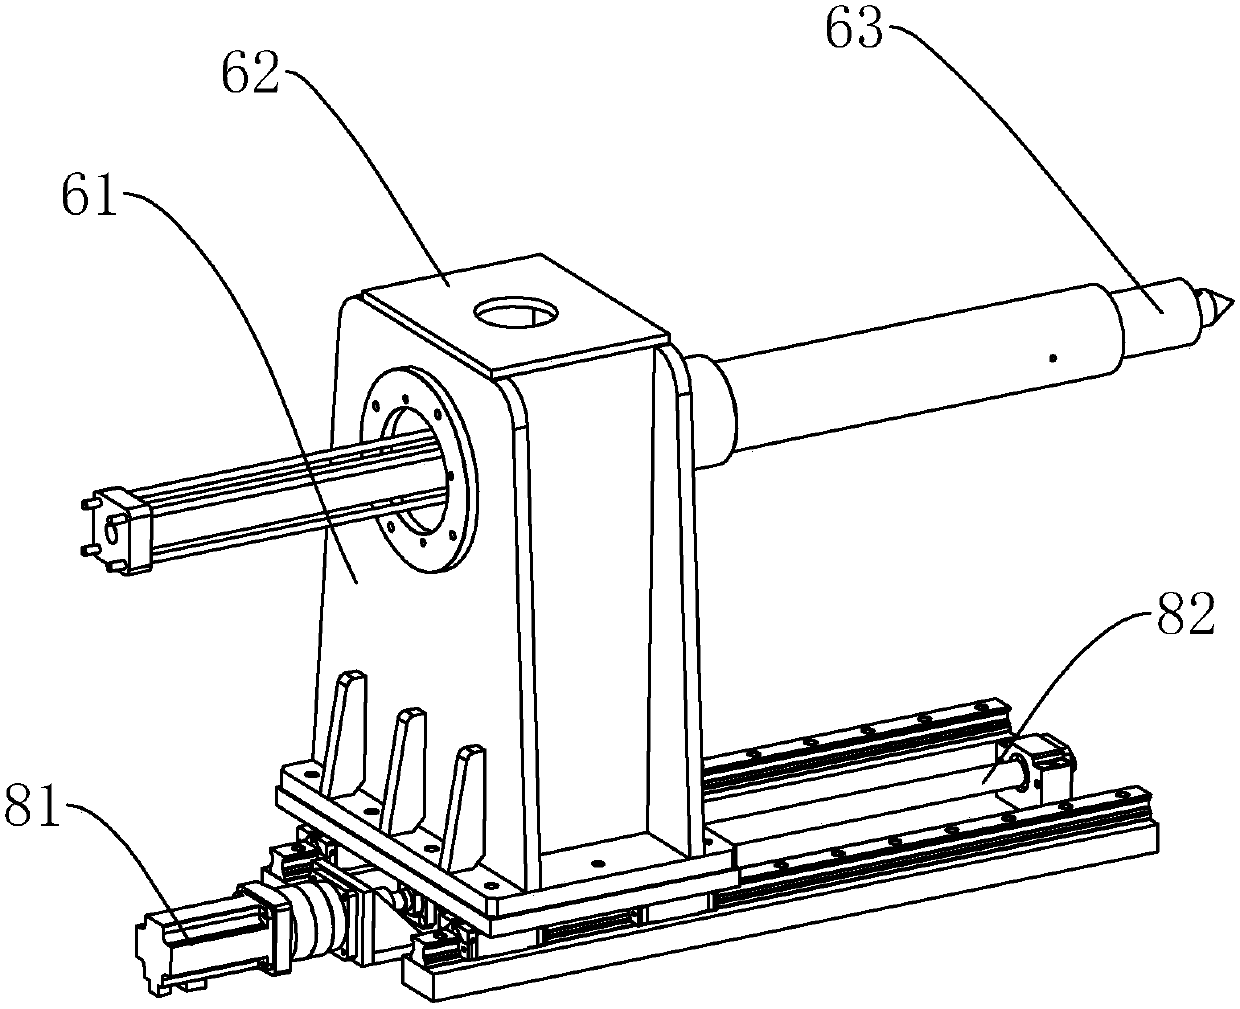 An assembly device for motor rotor and stator